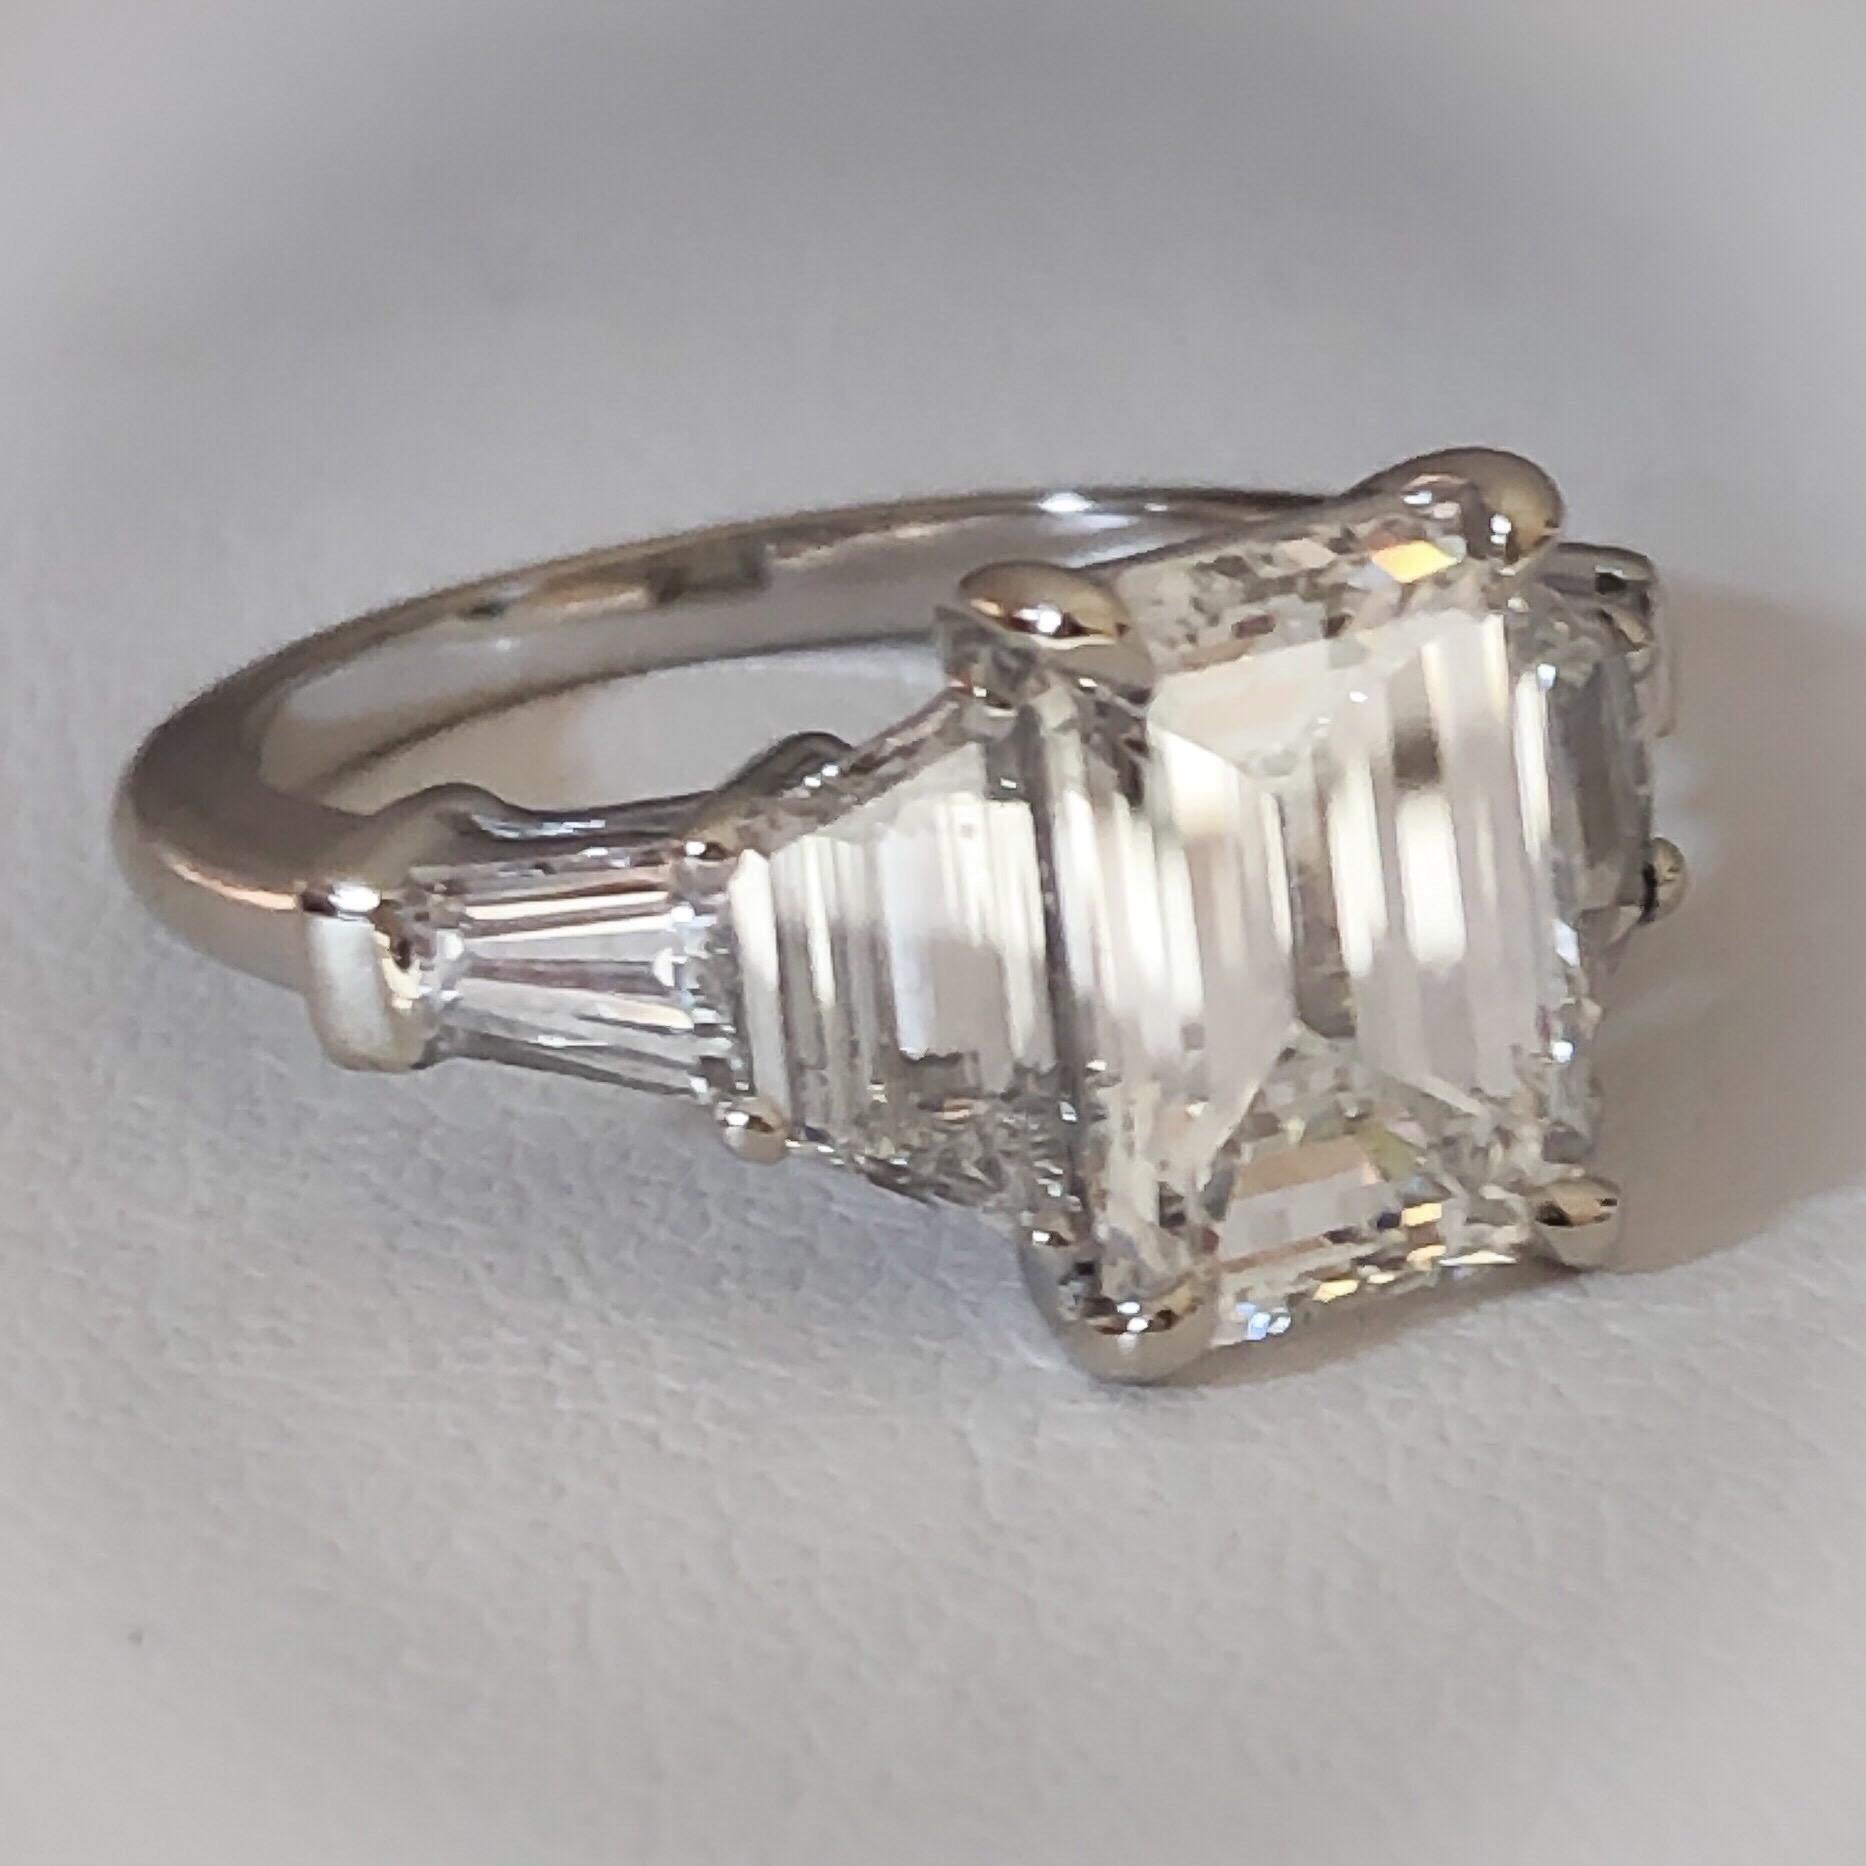 This ring is designed in 14 karat white gold and set with a stunning 3.03 carat GIA certified Emerald Cut diamond. The center diamond is a fancy emerald step-cut shape, H color, VVS1 clarity. It is flanked by two white trapezoid step-cut diamonds